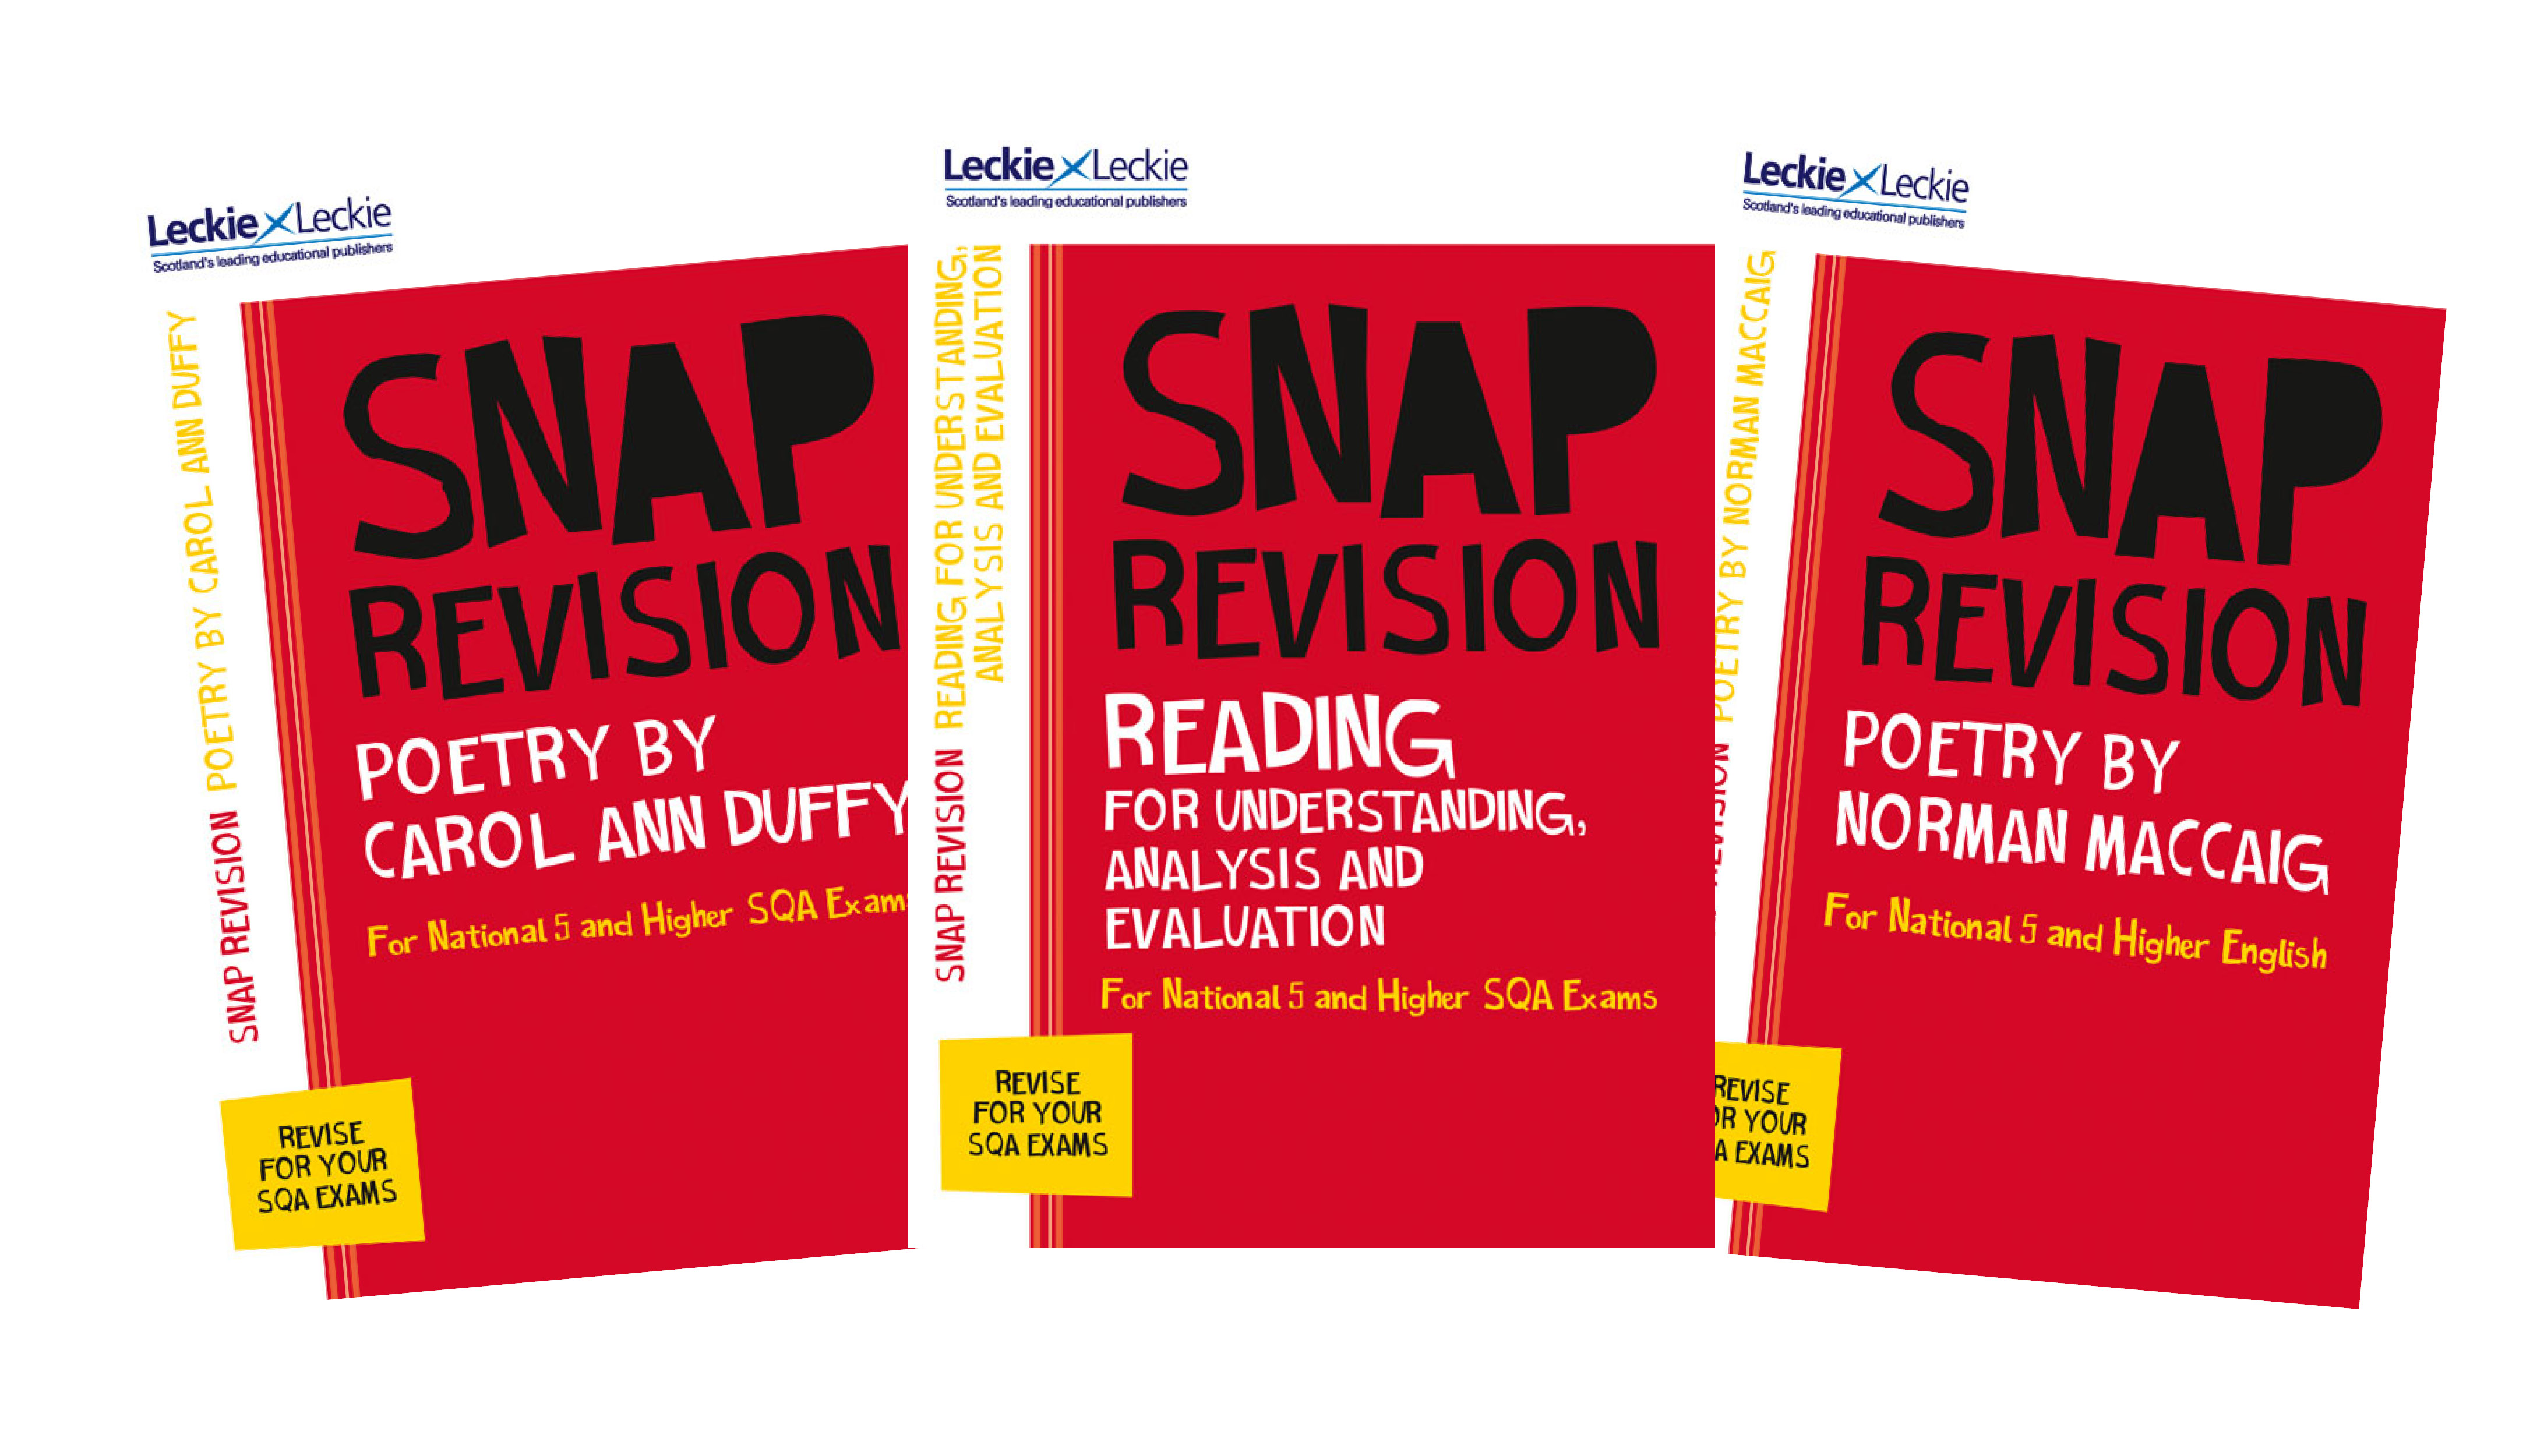 SNAP Revision for N5/Higher English